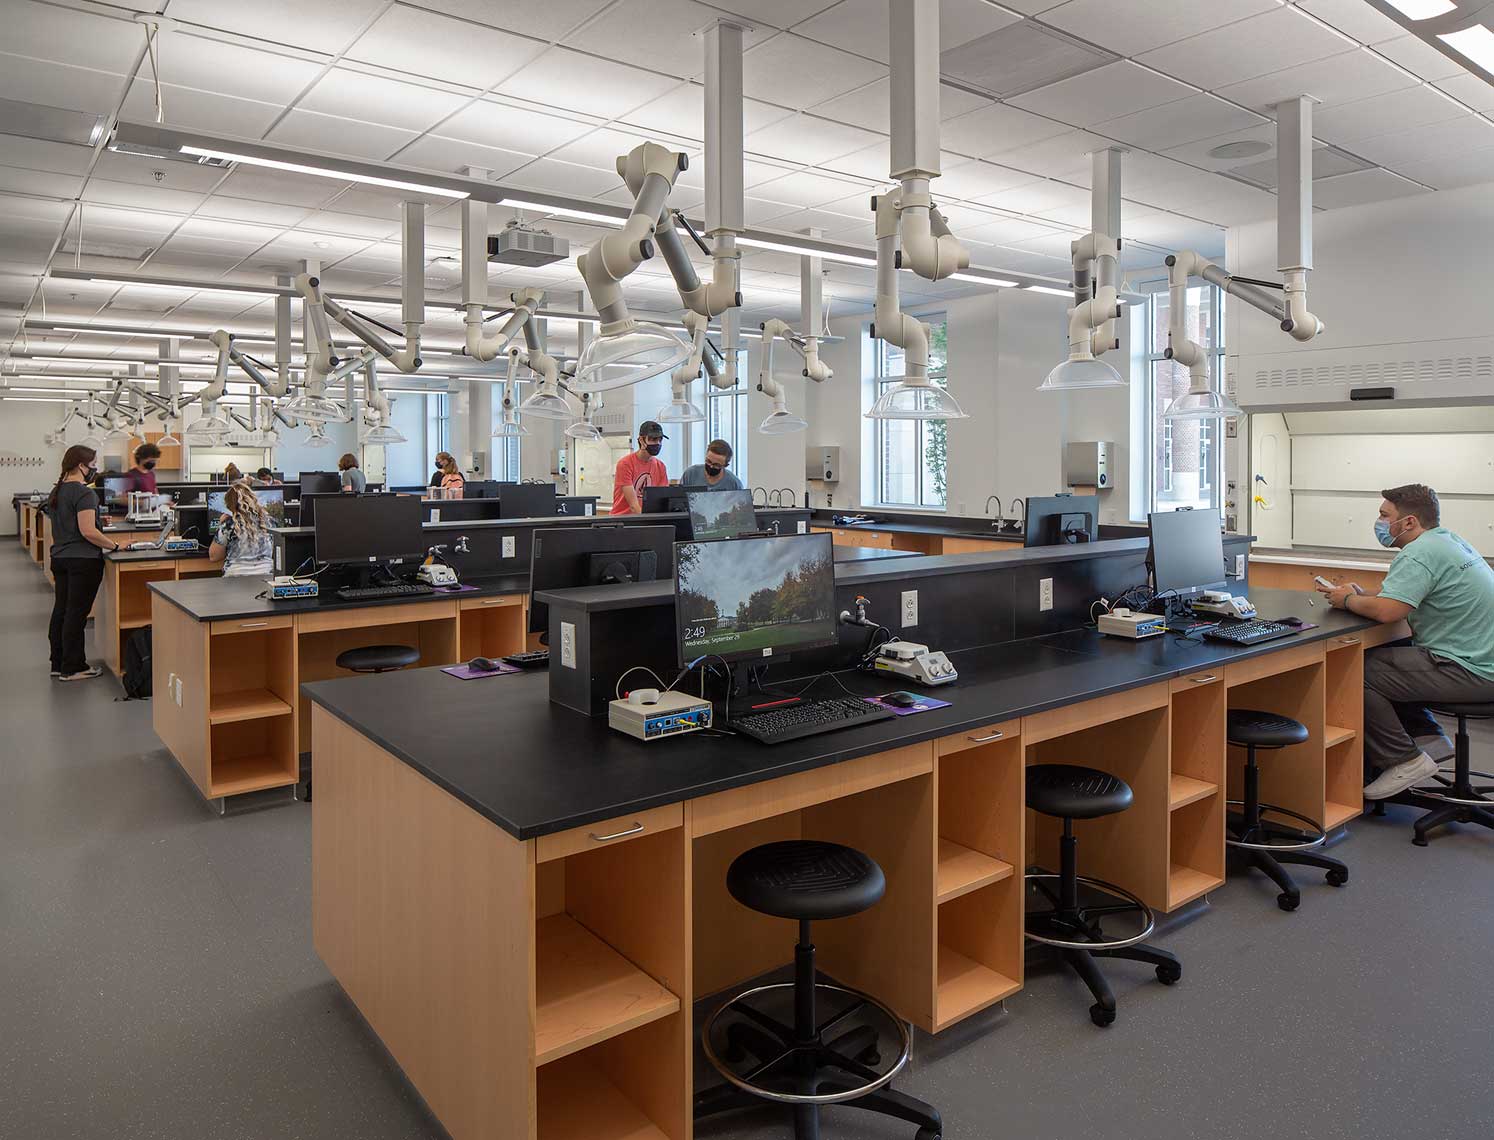 Tennessee Tech University - Laboratory Science Building - Student Lab<br>Upland Design Group / Bauer Askew Architecture